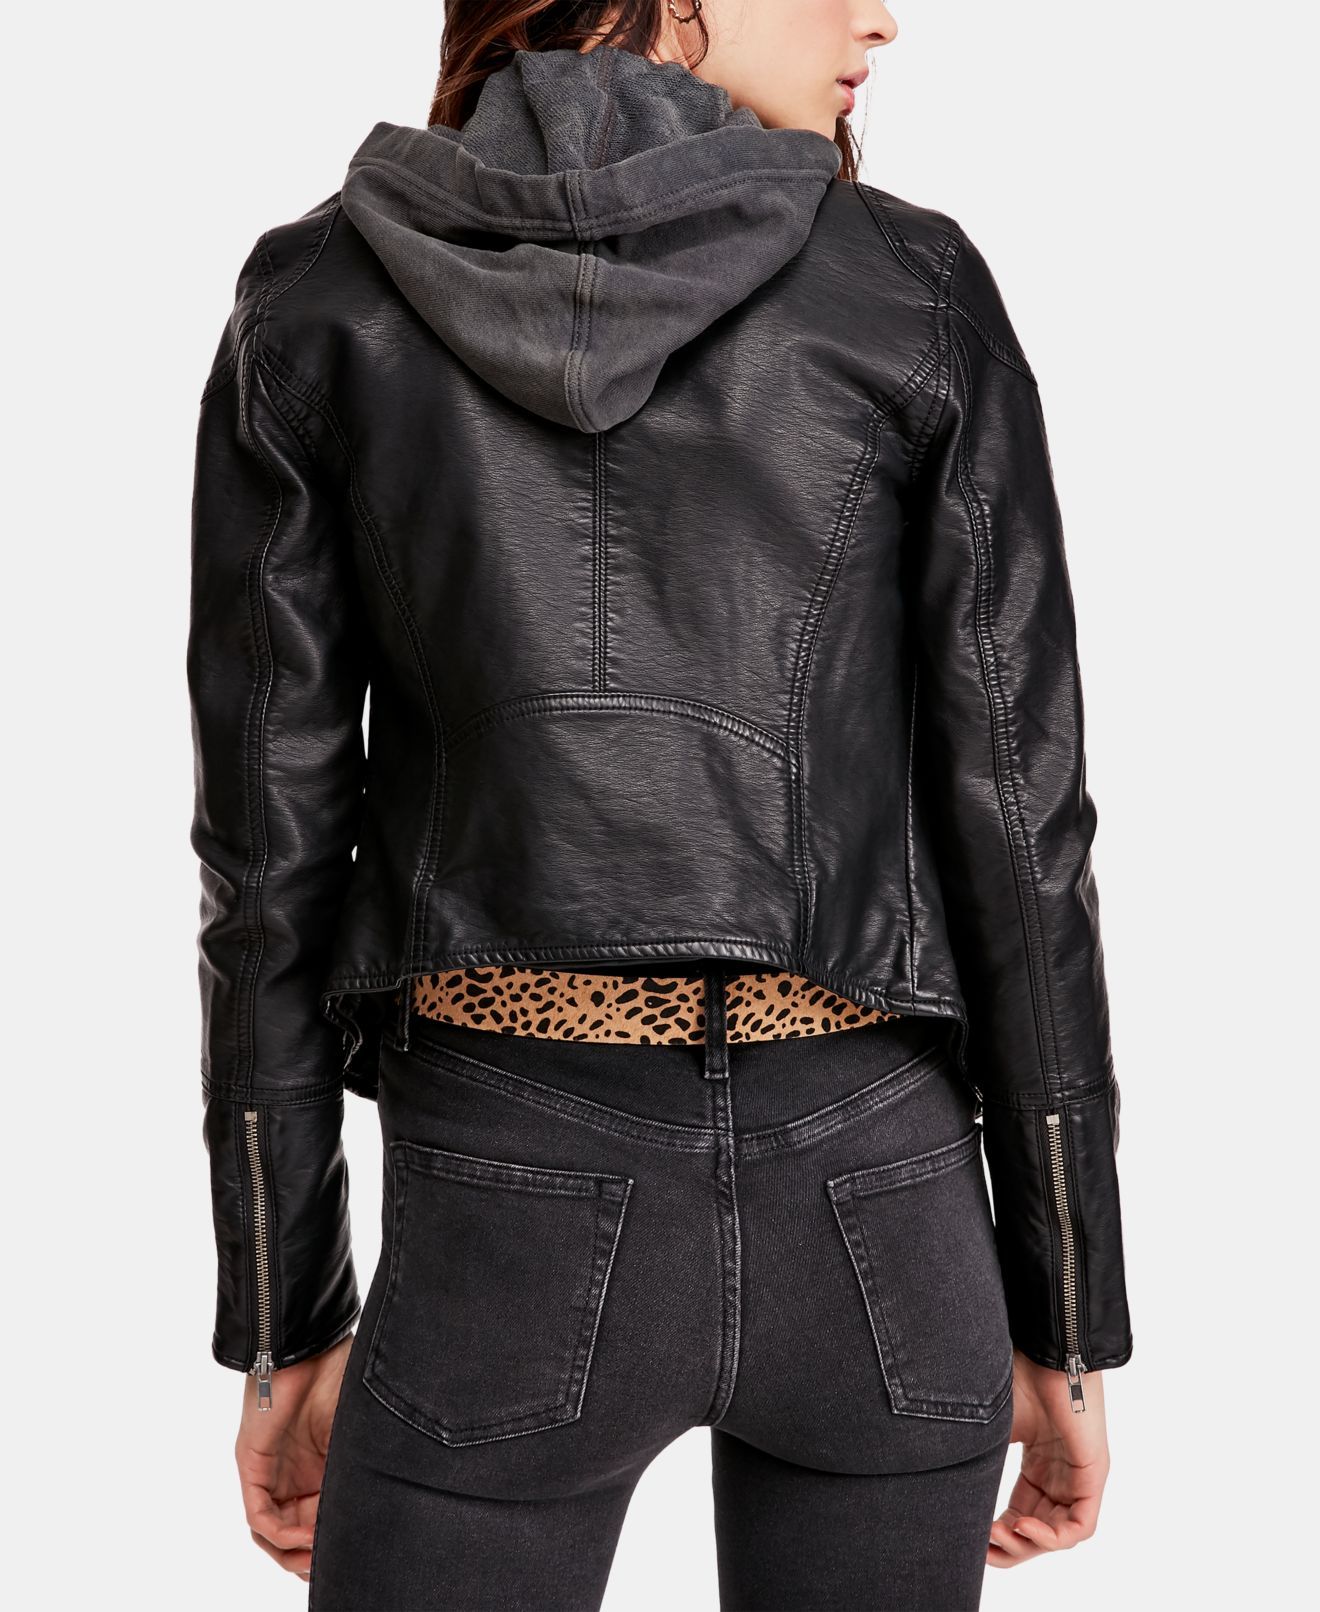 Color: Blacks Size Type: Regular Size (Women's): L Type: Jacket Style: Motorcycle Jacket Outer Shell Material: Rayon